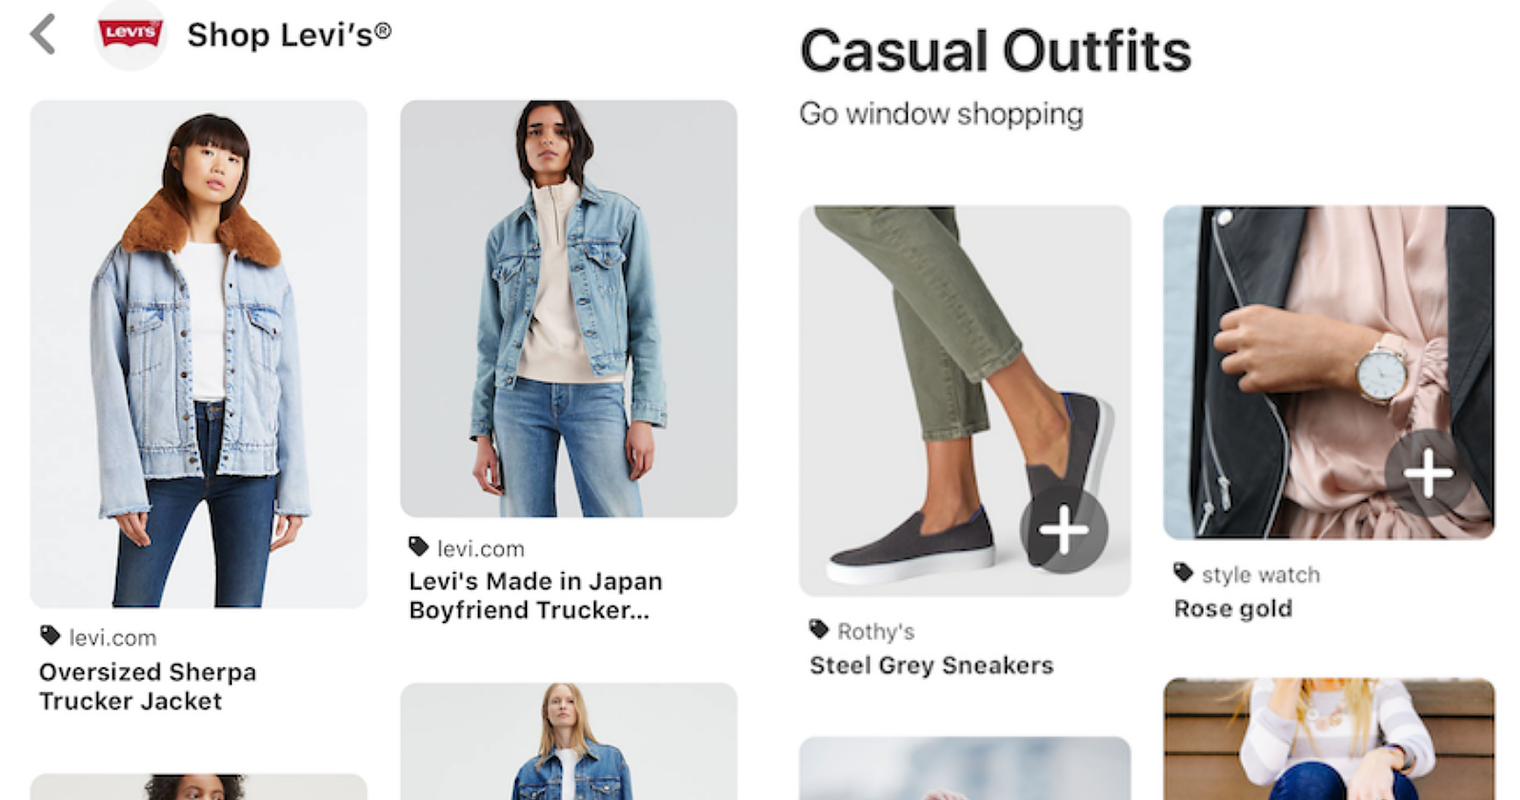 Pinterest Makes it Easier for Businesses to Sell Products